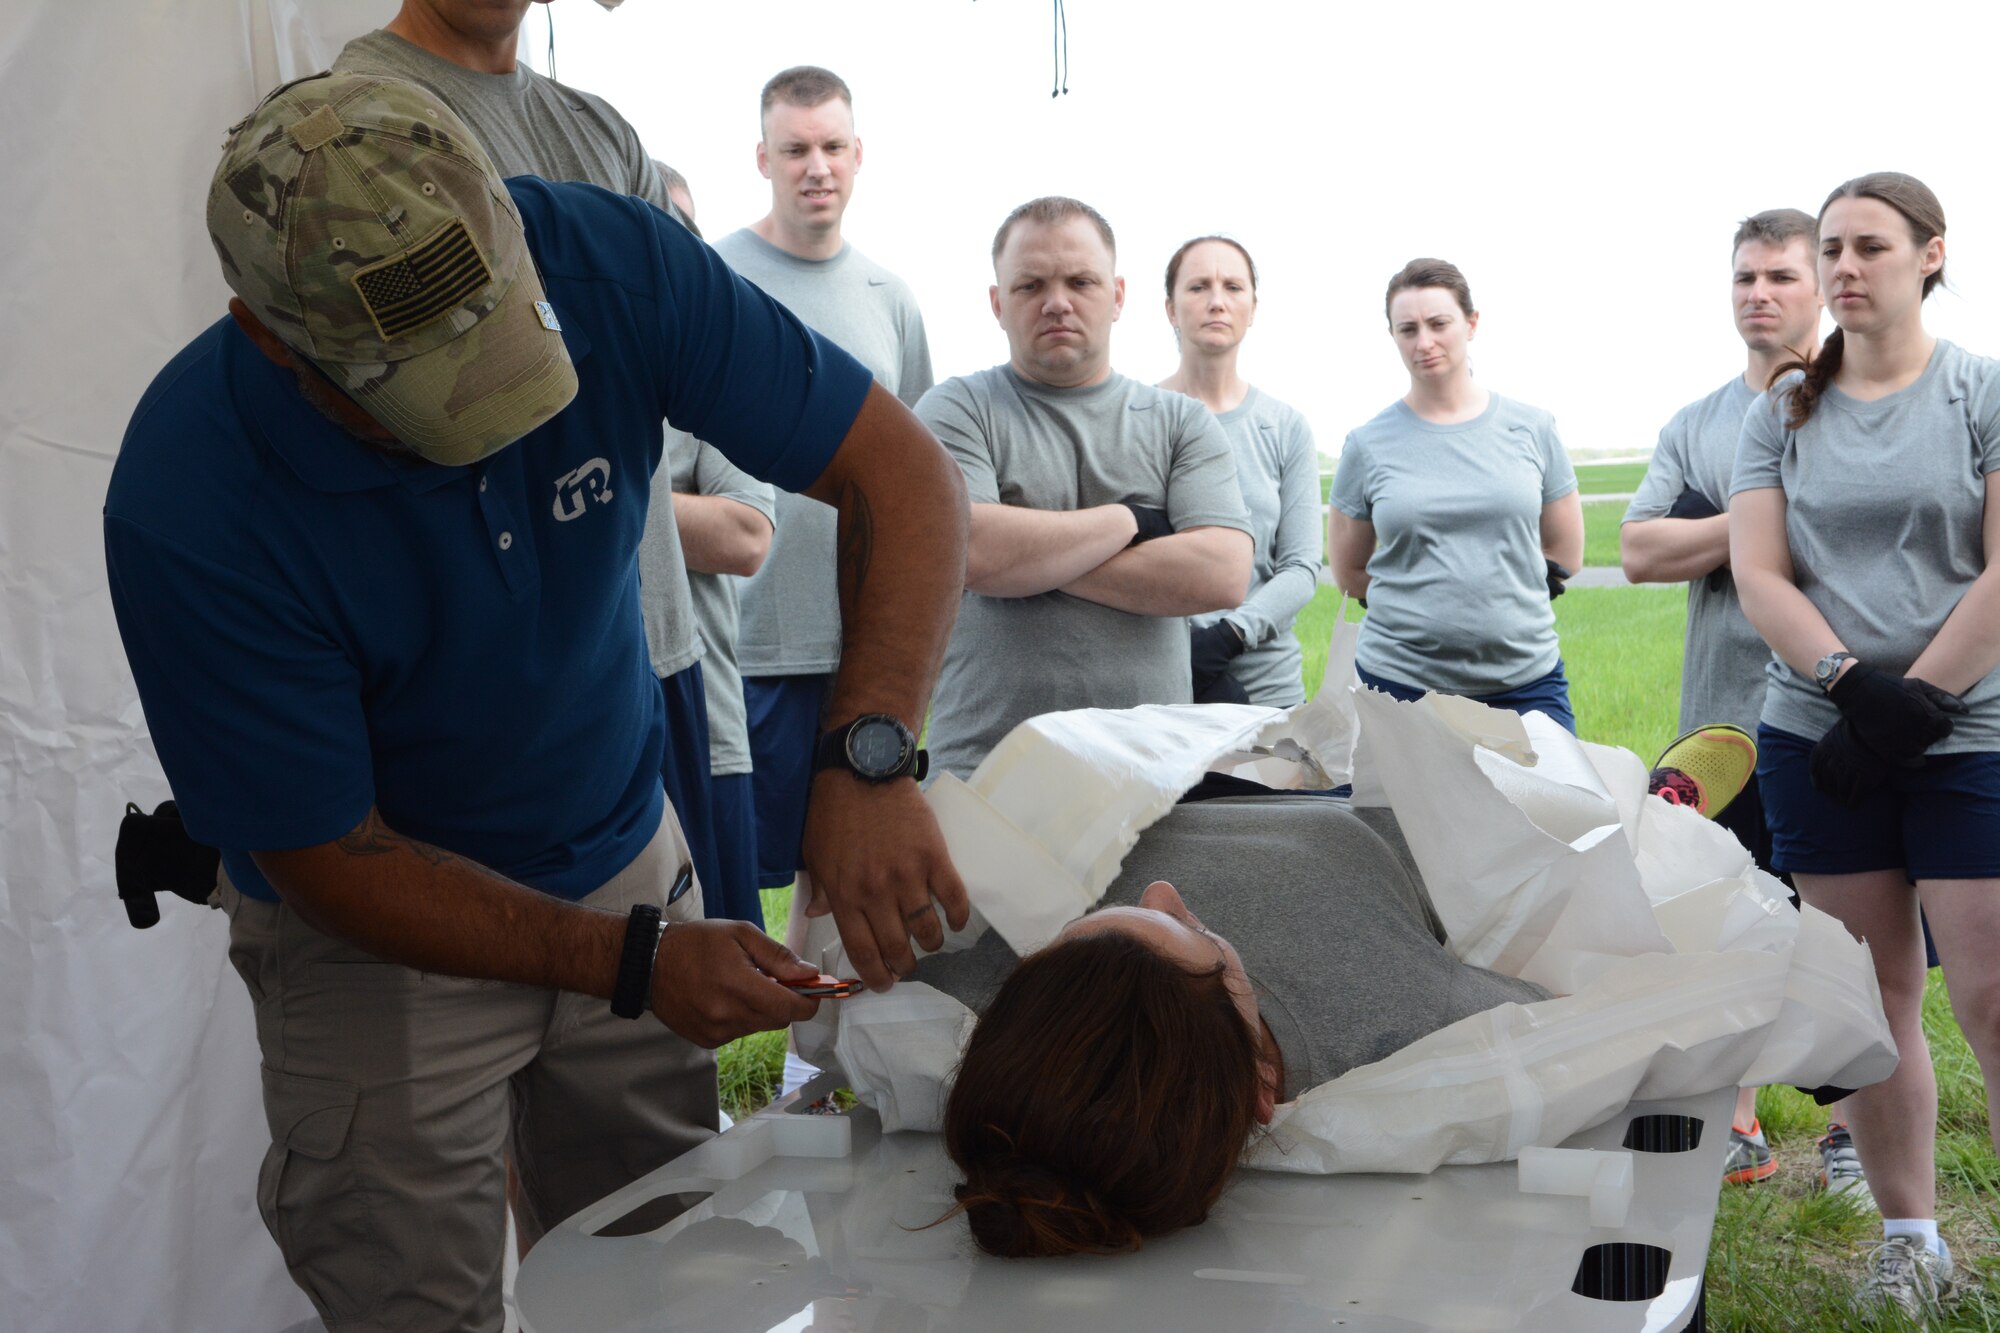 Airmen from across the base watch their instructor during a 976A Patient Decontamination certification at the 115th Fighter Wing in Madison, Wis., May 22, 2014. The 976A team is made up of people from different areas of the base, so that base personnel affected by a chemical situation don’t have to wait for the firefighters and security forces units to be available. If an actual emergency occurred, the firefighters and security forces Airmen would be required elsewhere. (Air National Guard photo by Senior Airman Andrea F. Liechti)